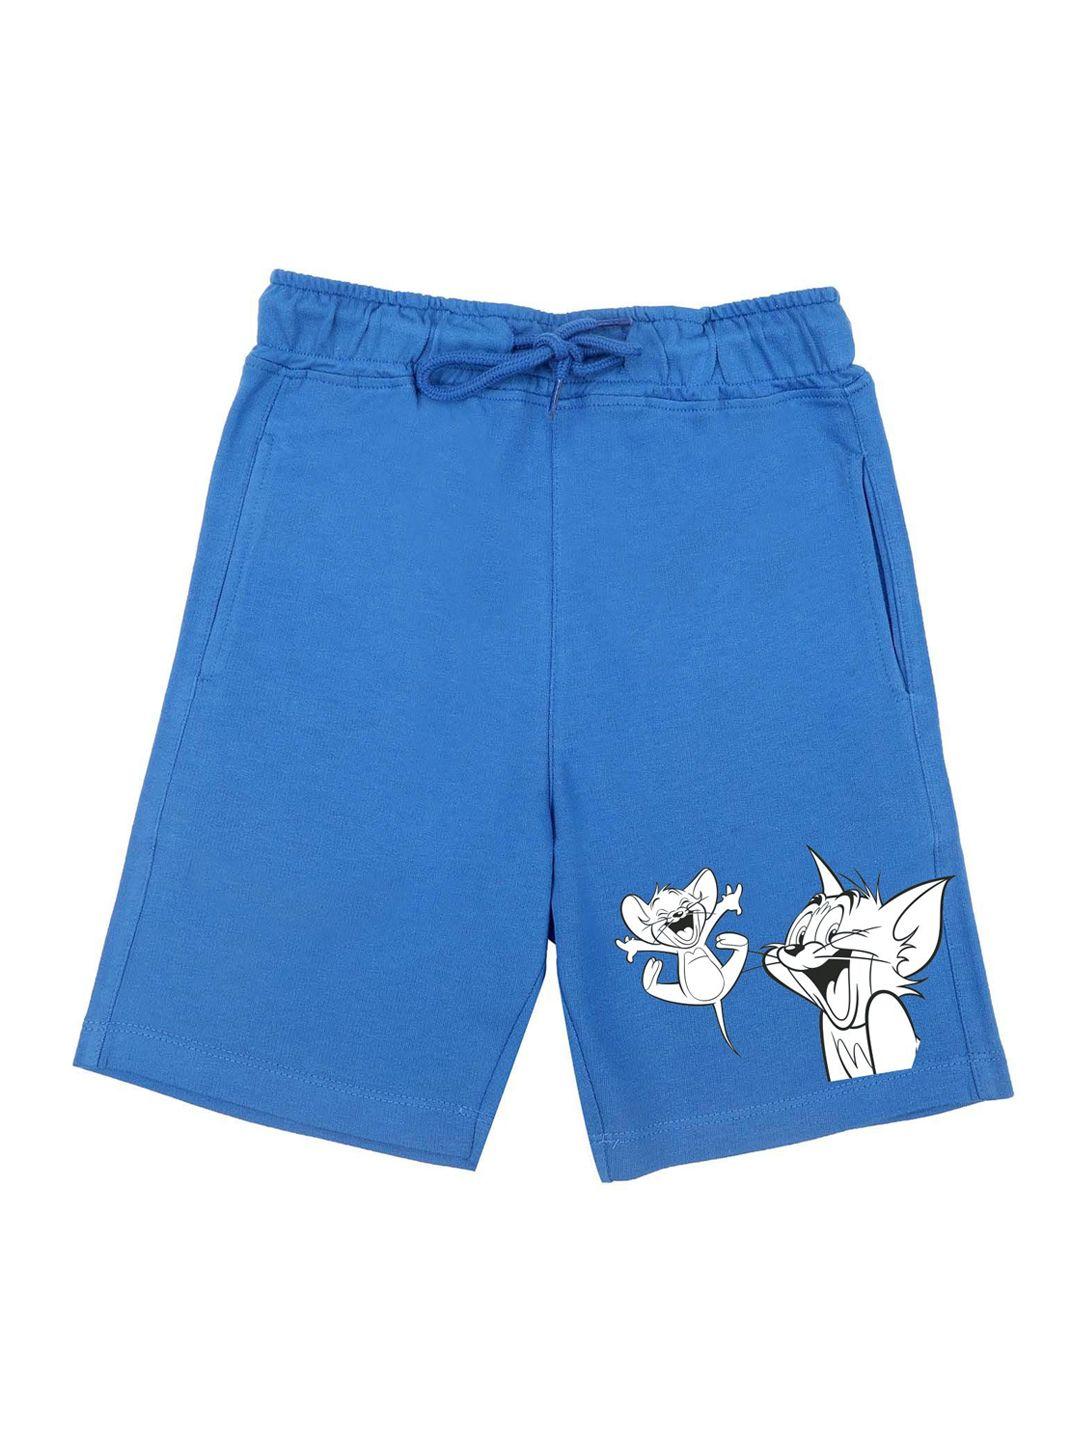 tom & jerry by wear your mind boys blue printed tom & jerry shorts